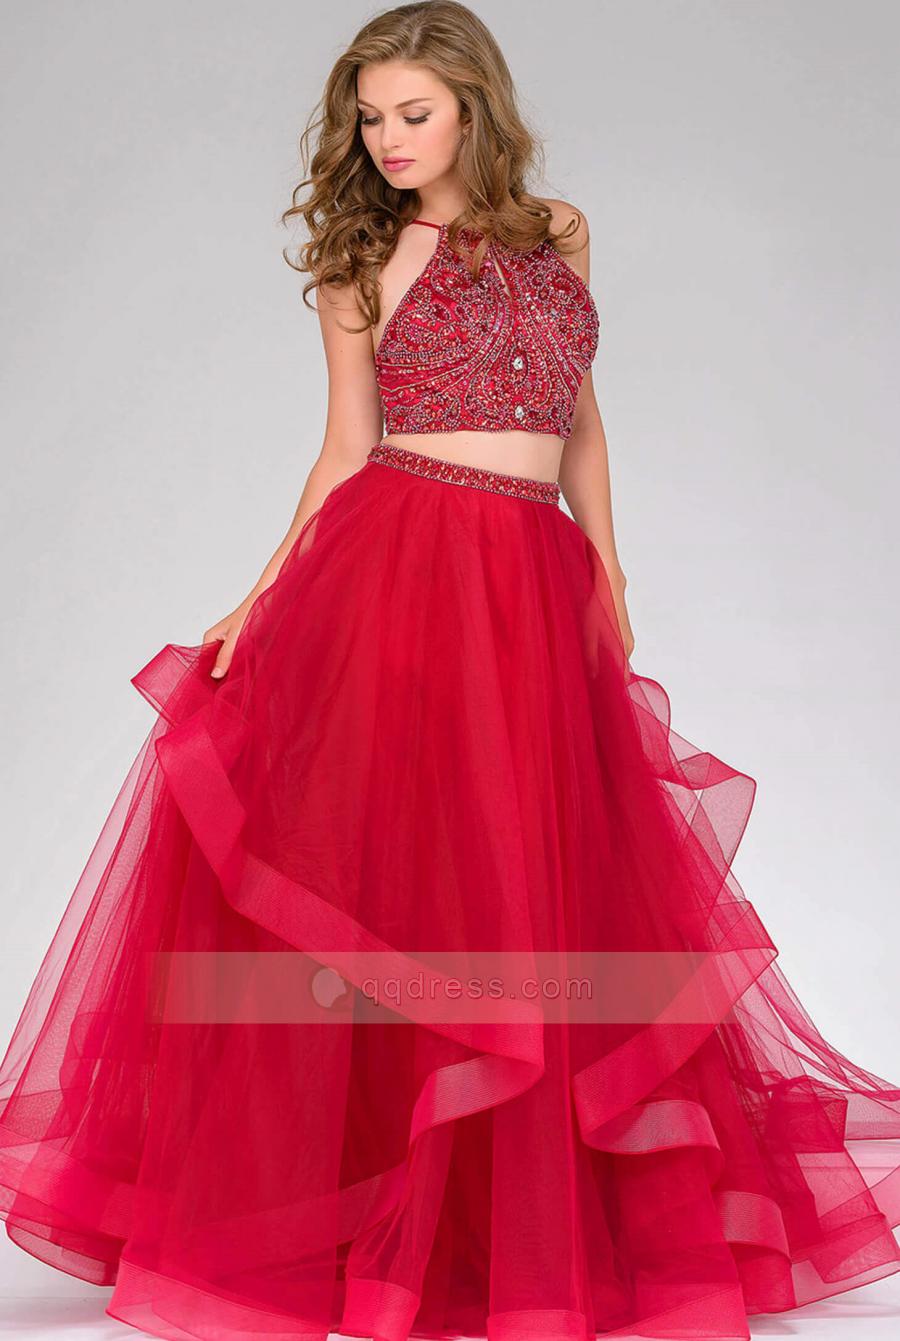 Mariage - A-line Halter Neck Two Piece Rhinestone Bodice Ruffled Tulle Prom Gown Sale Cheap